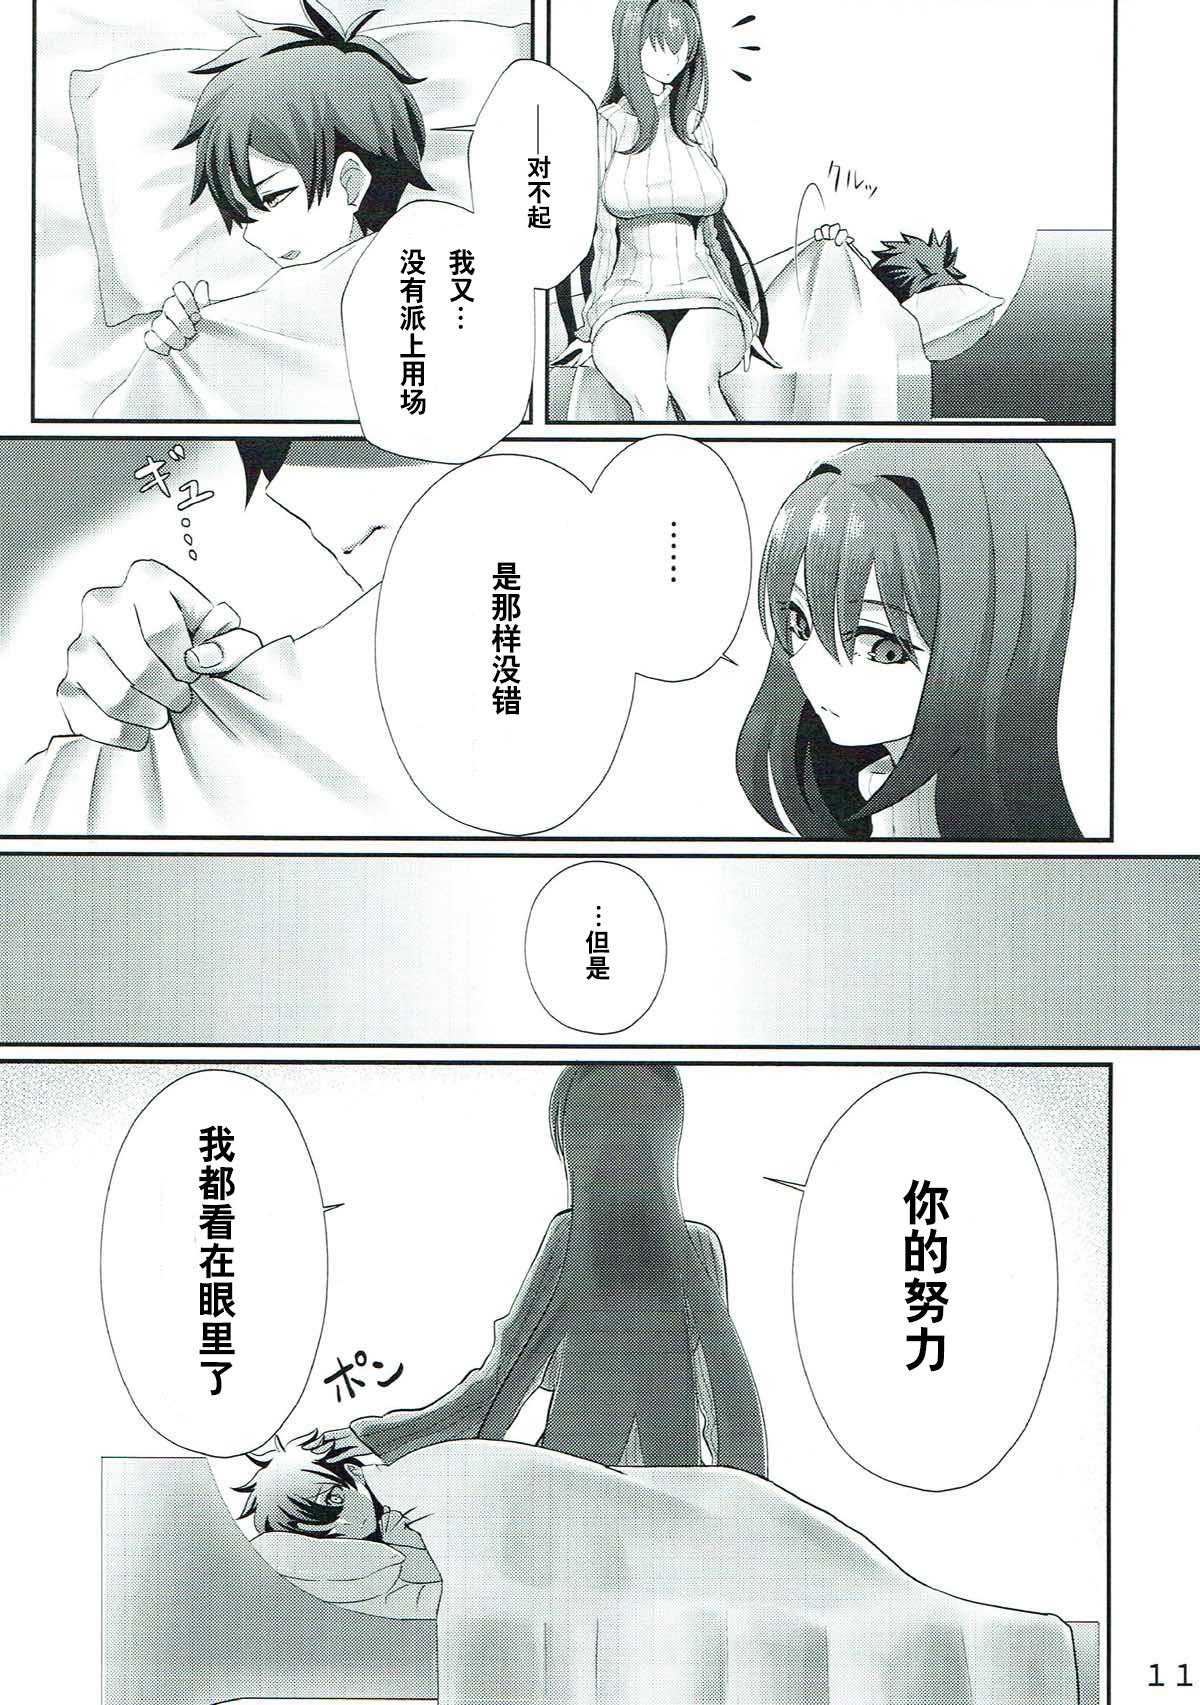 Scathach-san to Issho 9